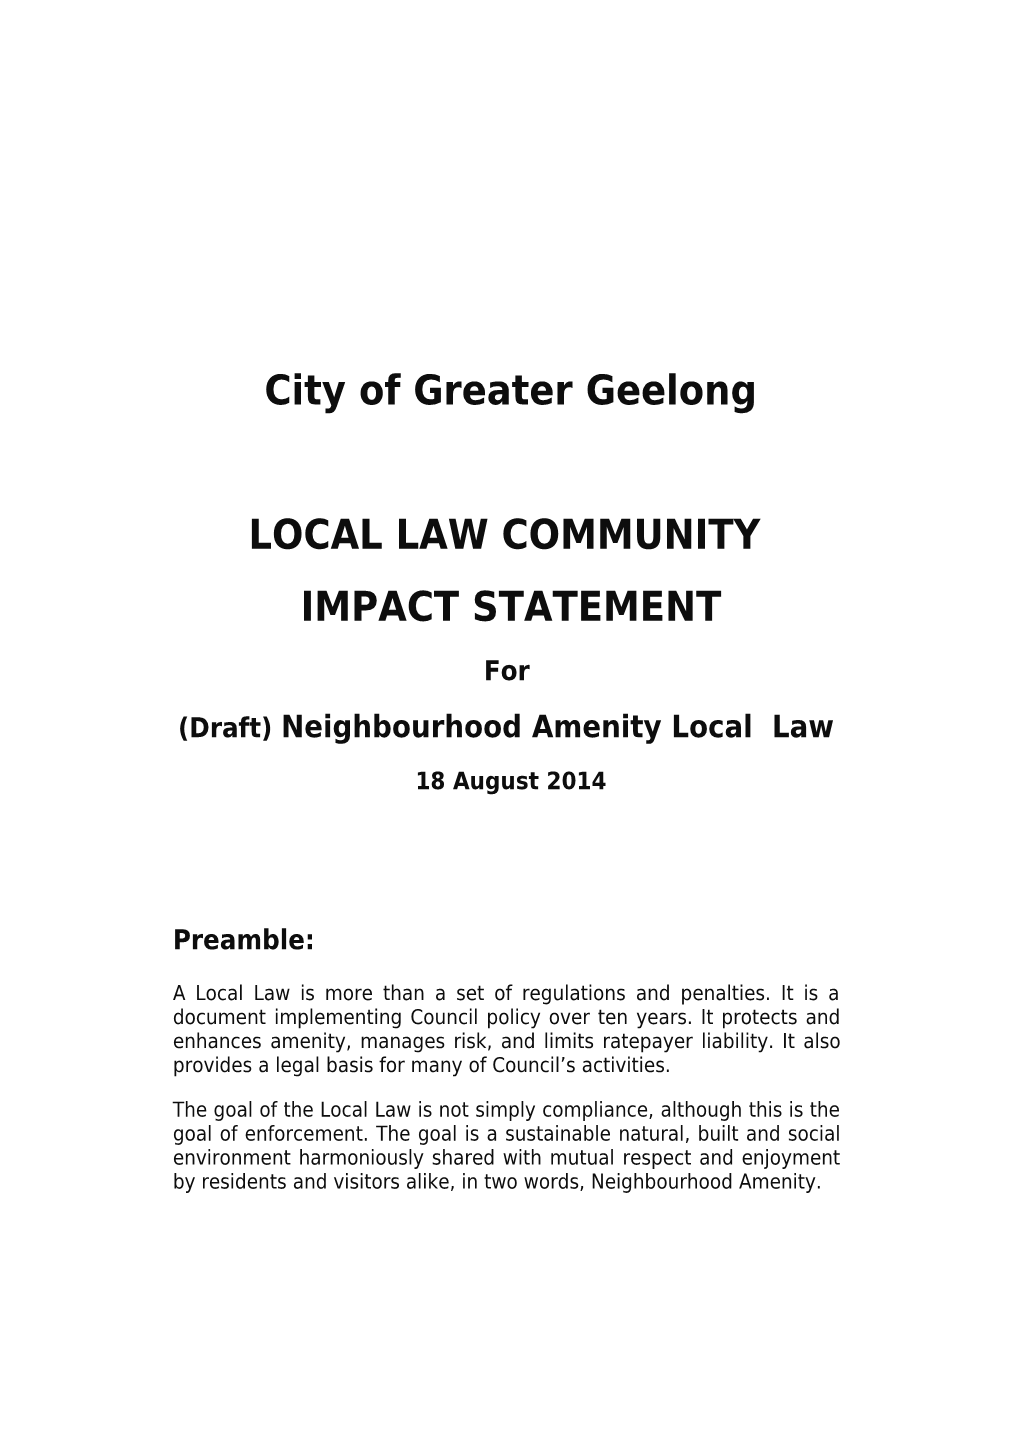 City of Greater Geelong s1